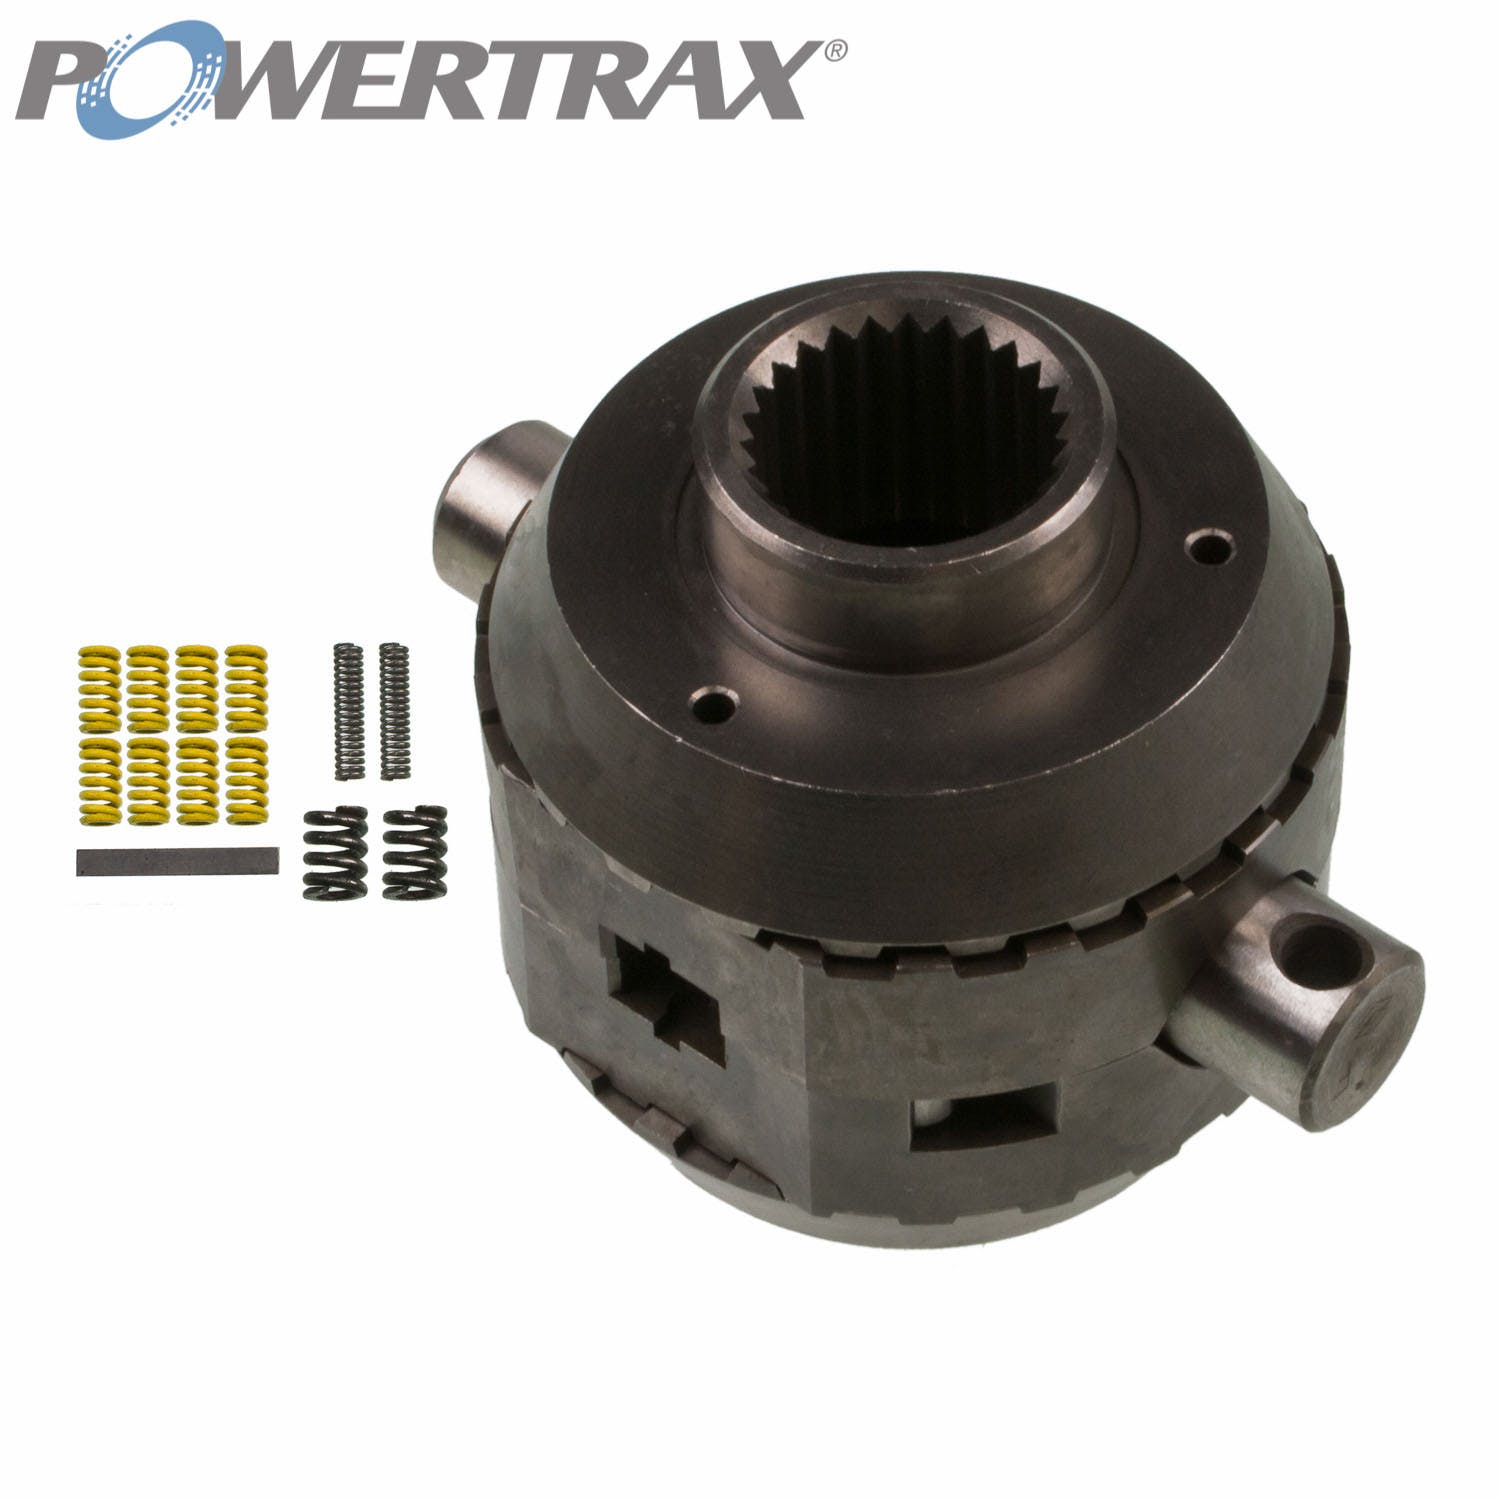 PowerTrax 9207752605 No-Slip Traction System